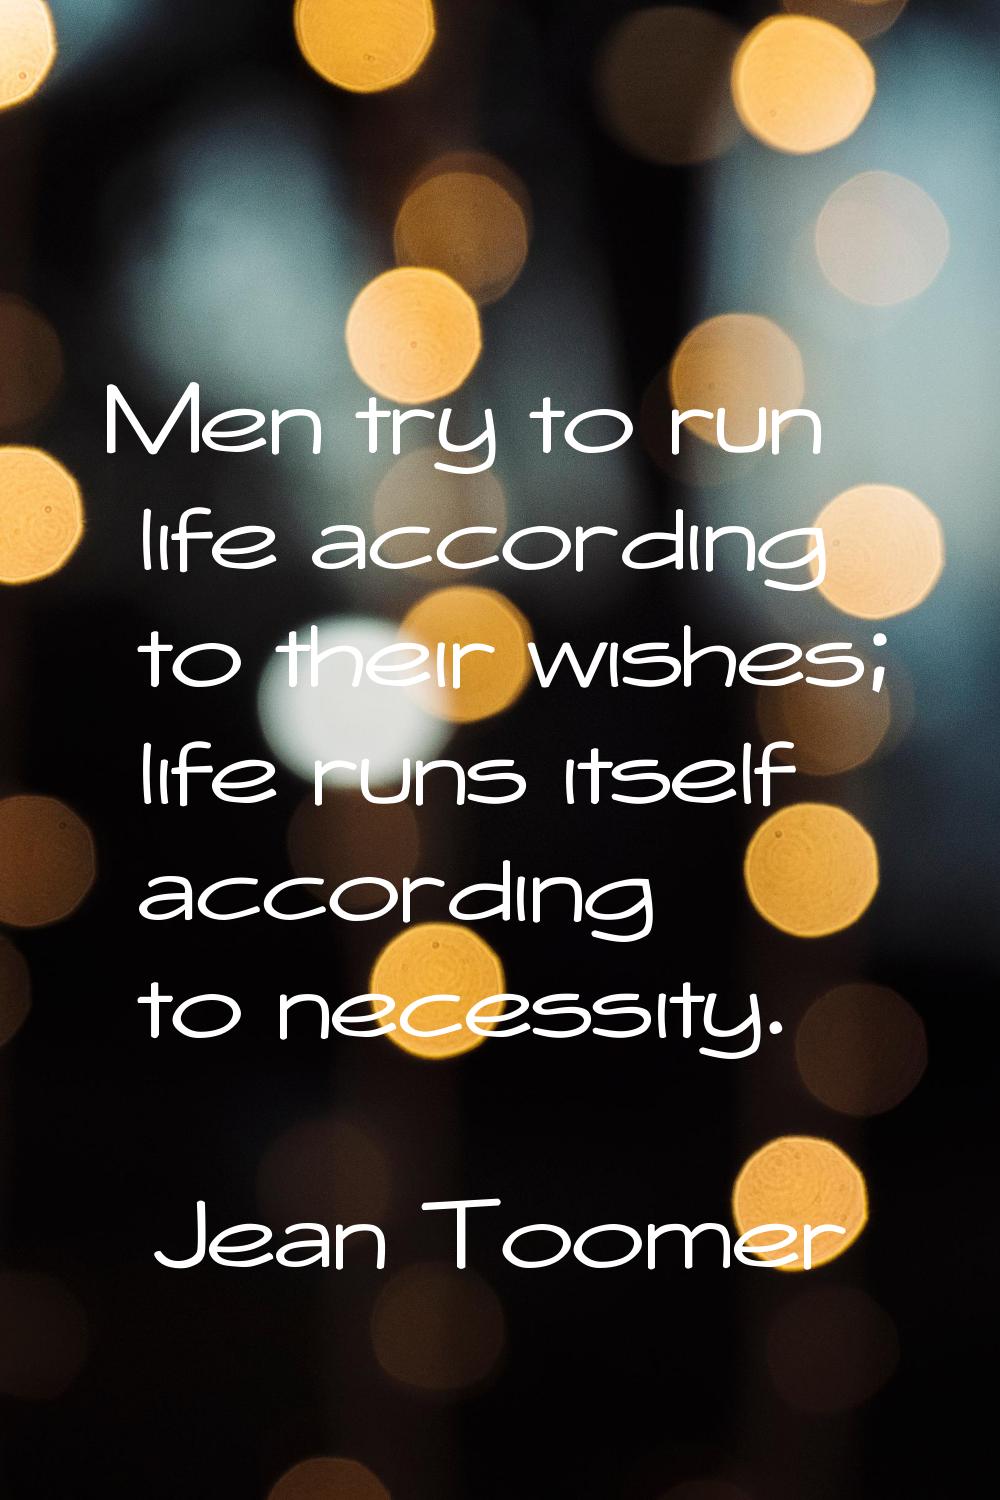 Men try to run life according to their wishes; life runs itself according to necessity.